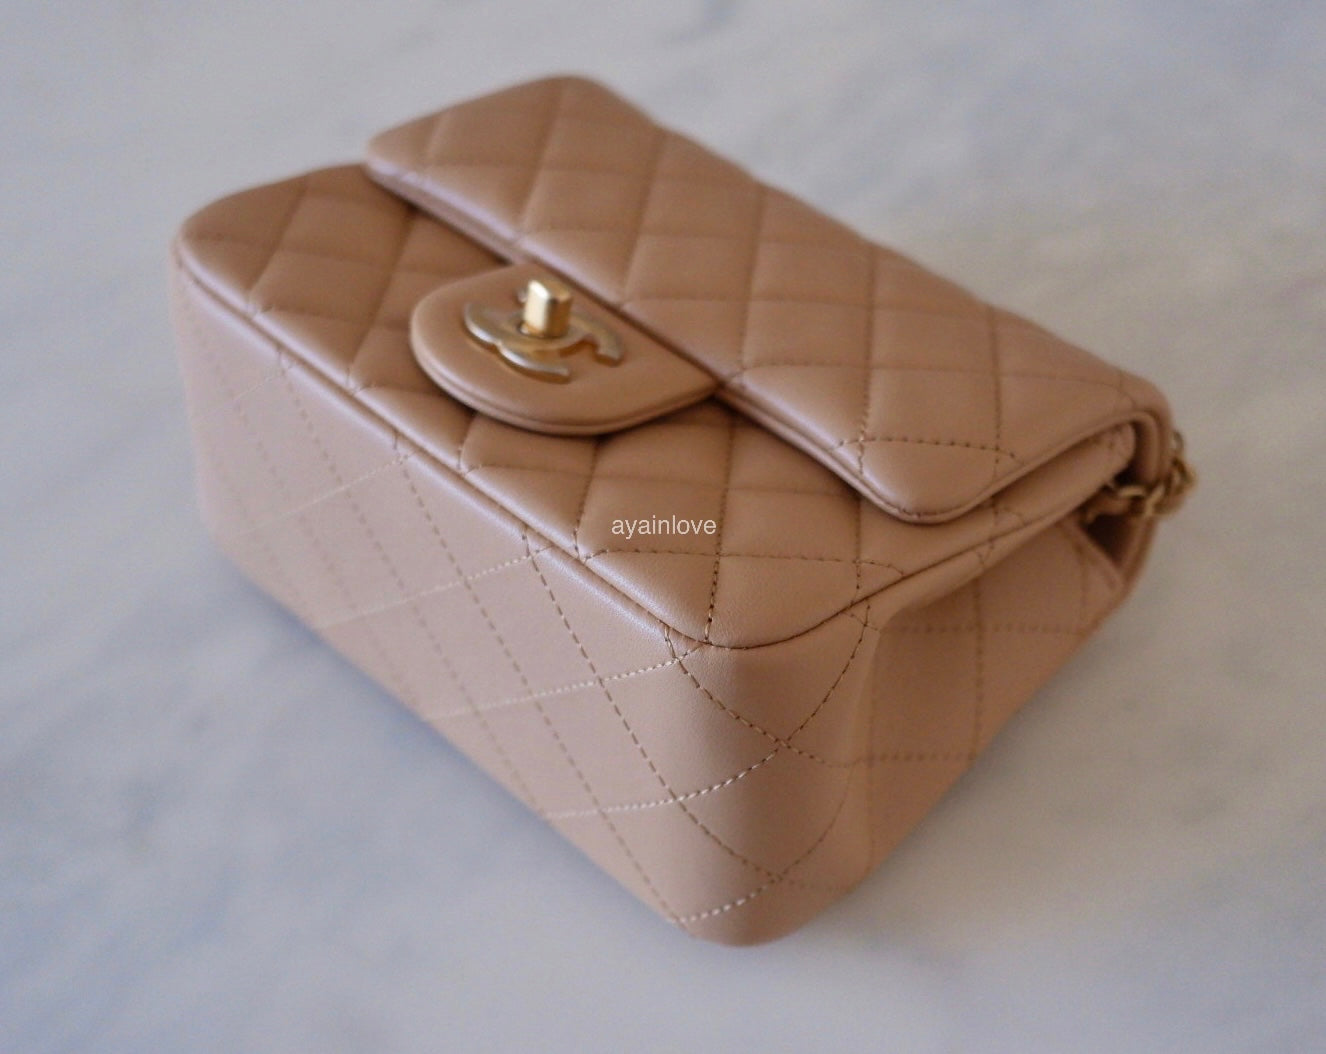 chanel beige small classic flap